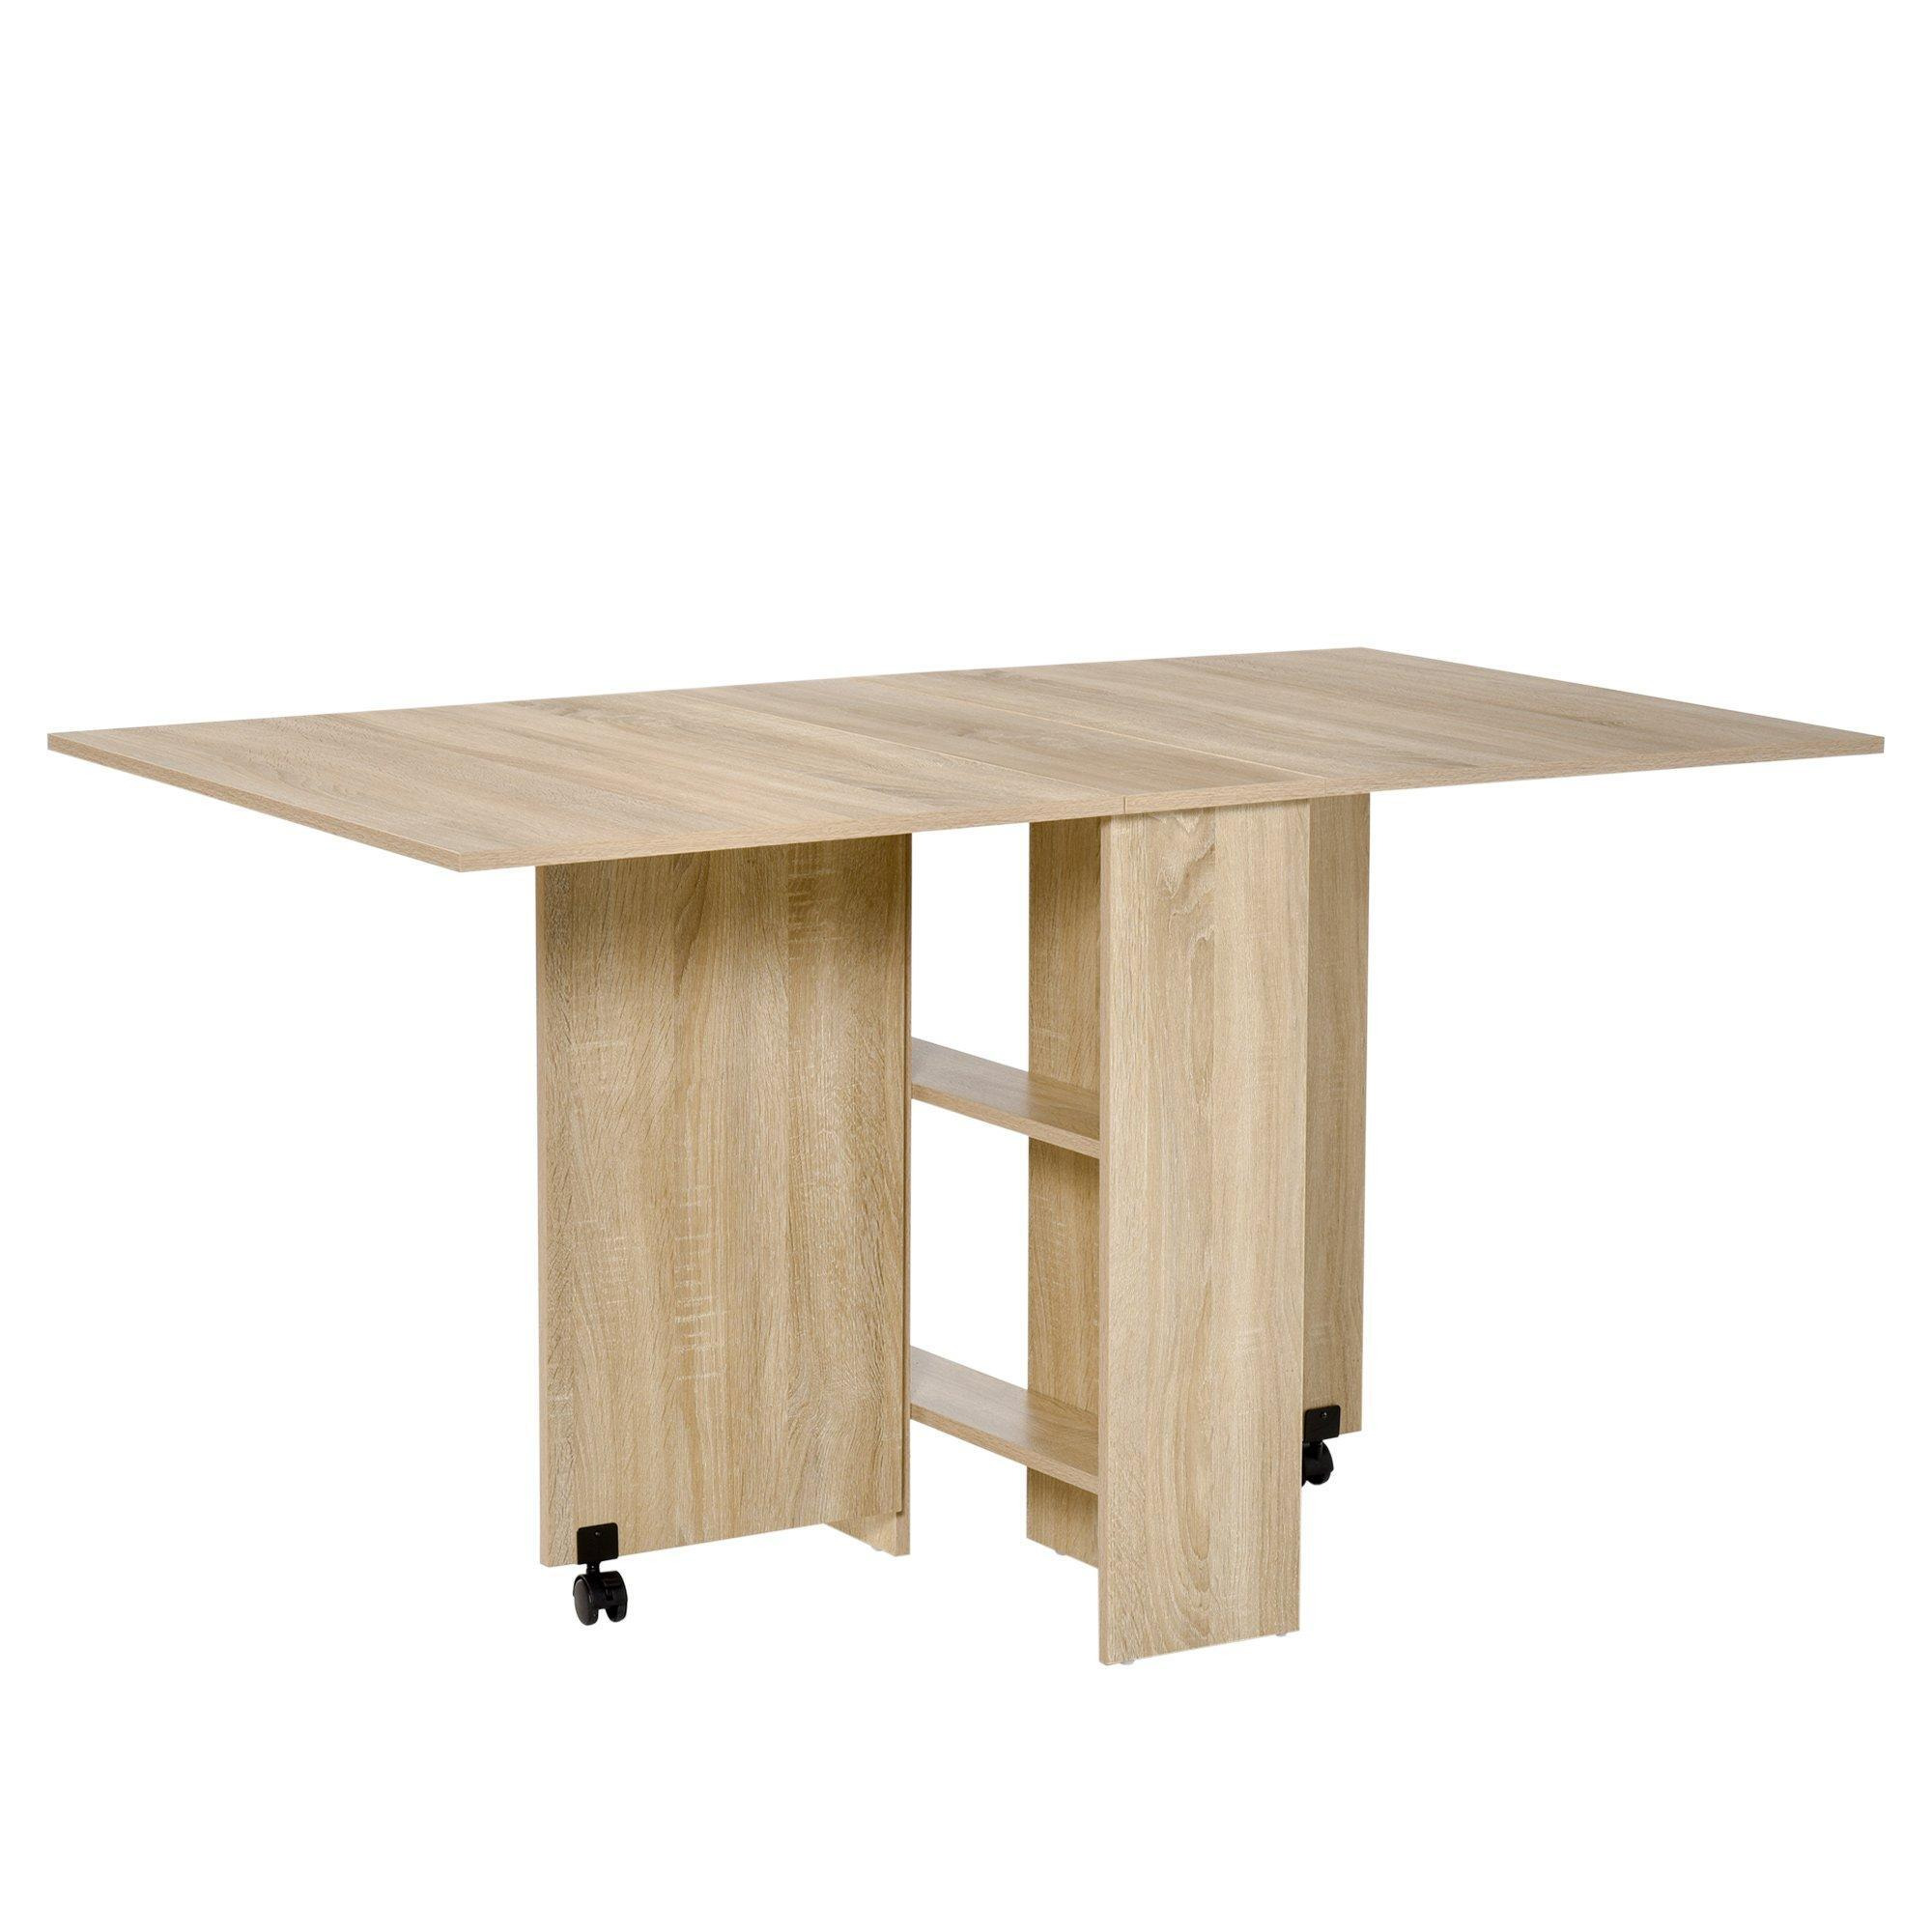 Folding Dining Table Drop Leaf Table for Small Spaces - image 1